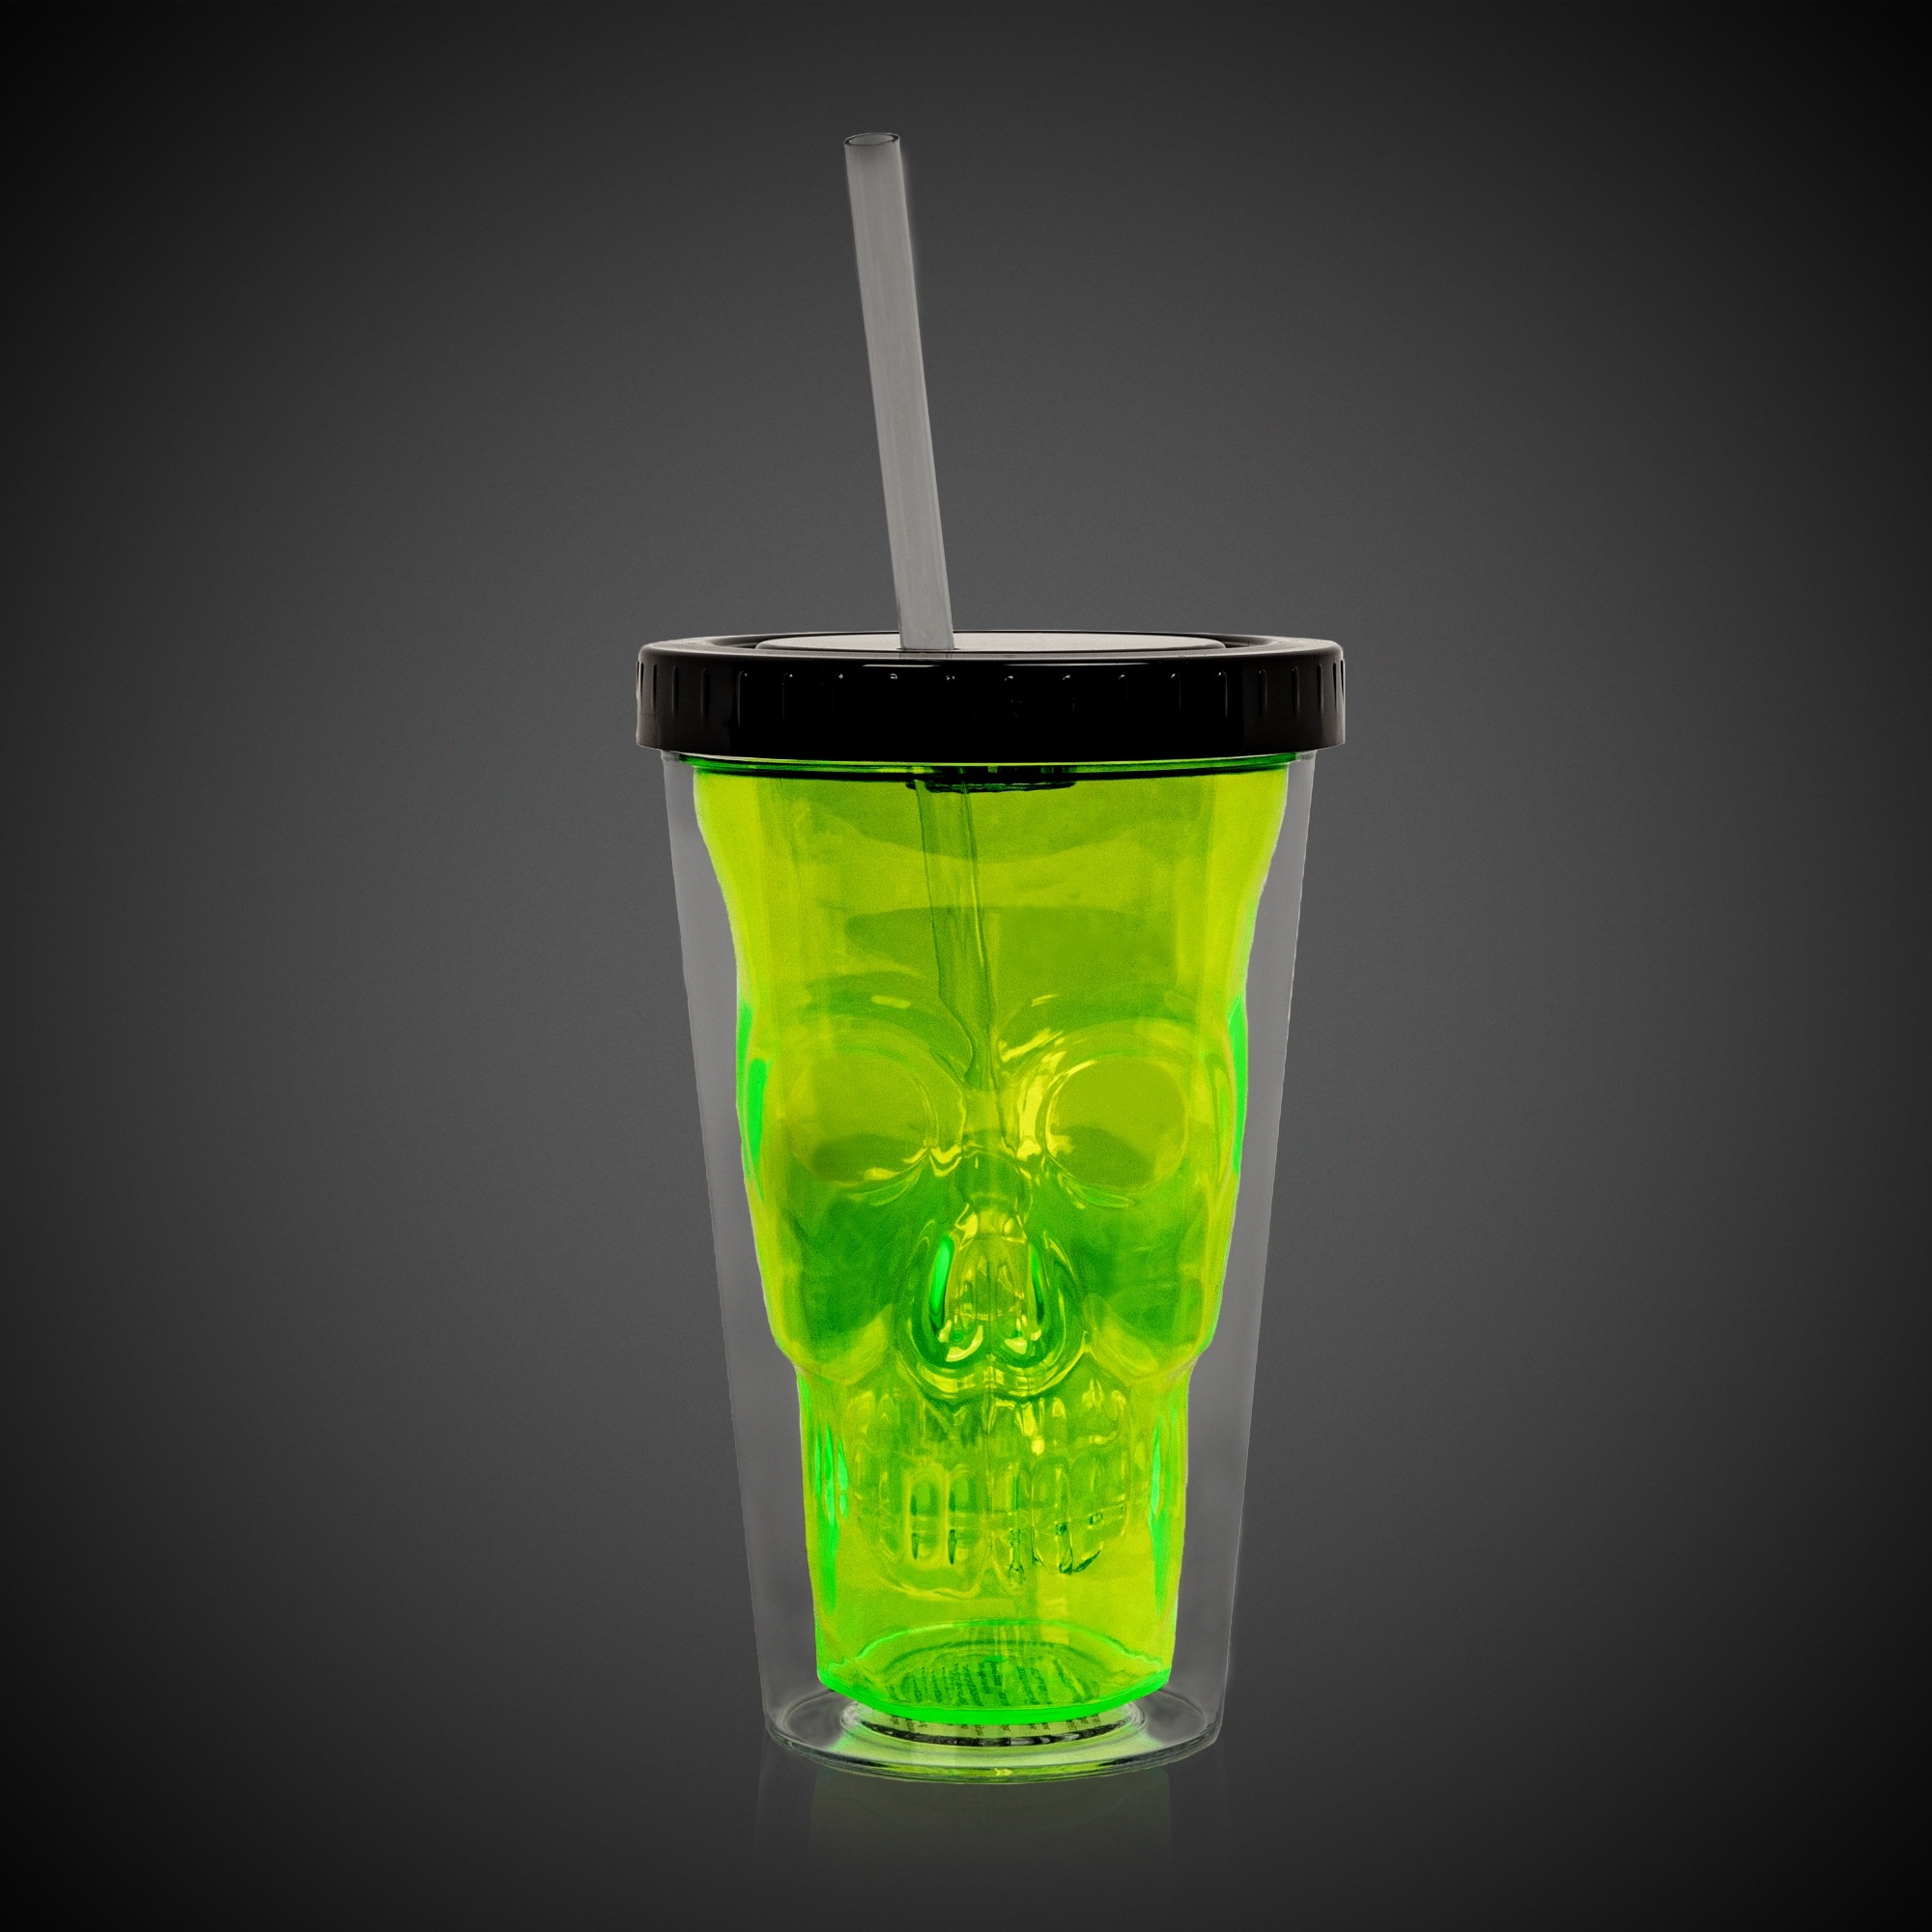 Rhode Island Novelty Flashing Skull Mug - Unique Lights Drinking Mug For  Halloween Cocktail, Birthday Squad Cups, Fun Drinking Accessories, Novelty  LED Light Up Party Mugs for Kids and Adults - 16